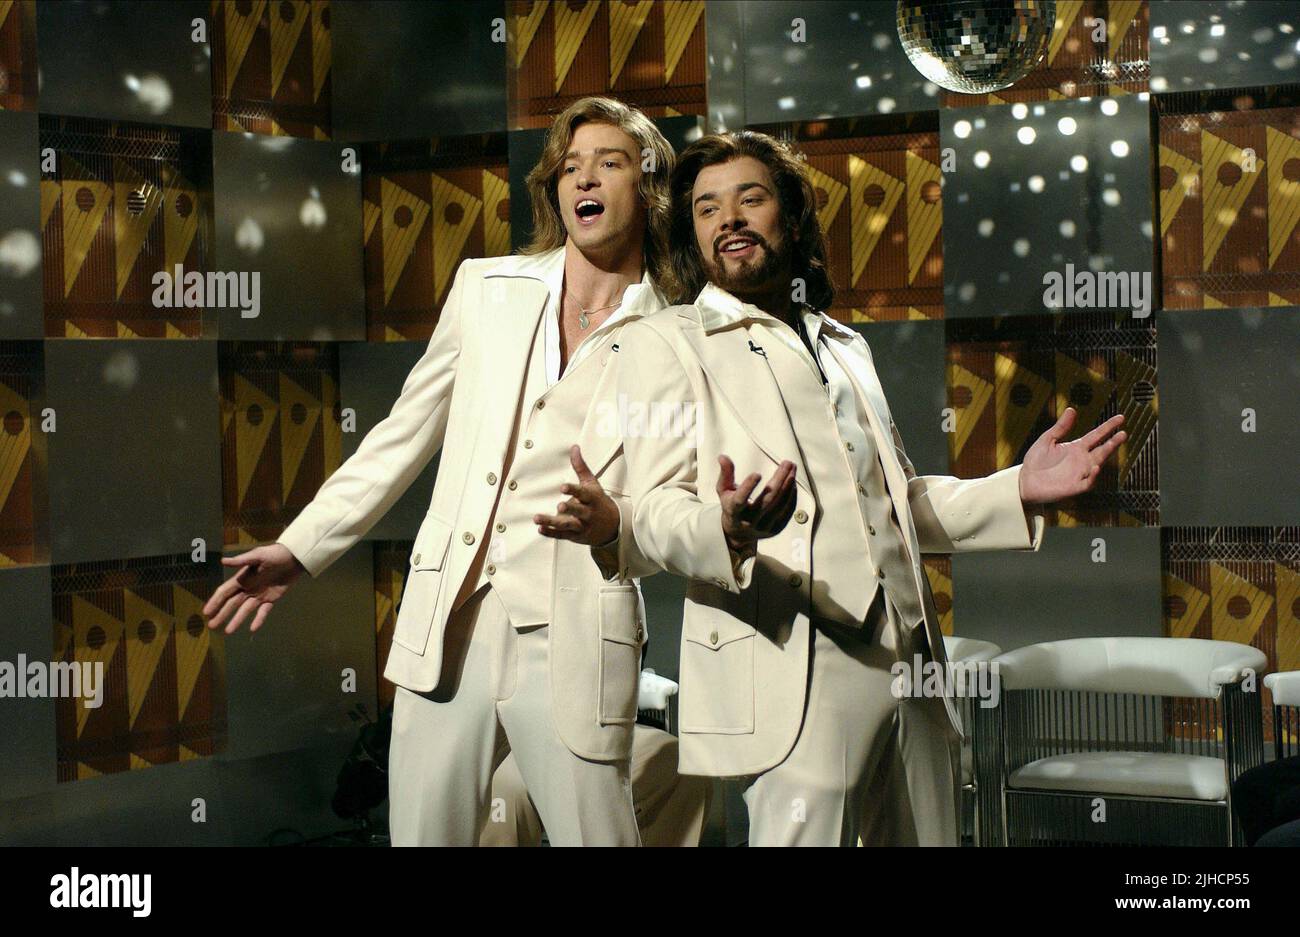 JUSTIN TIMBERLAKE (come Robin Gibb), JIMMY FALLON (come Barry Gibb) Bee Gees, Saturday Night Live, 2003 Foto Stock